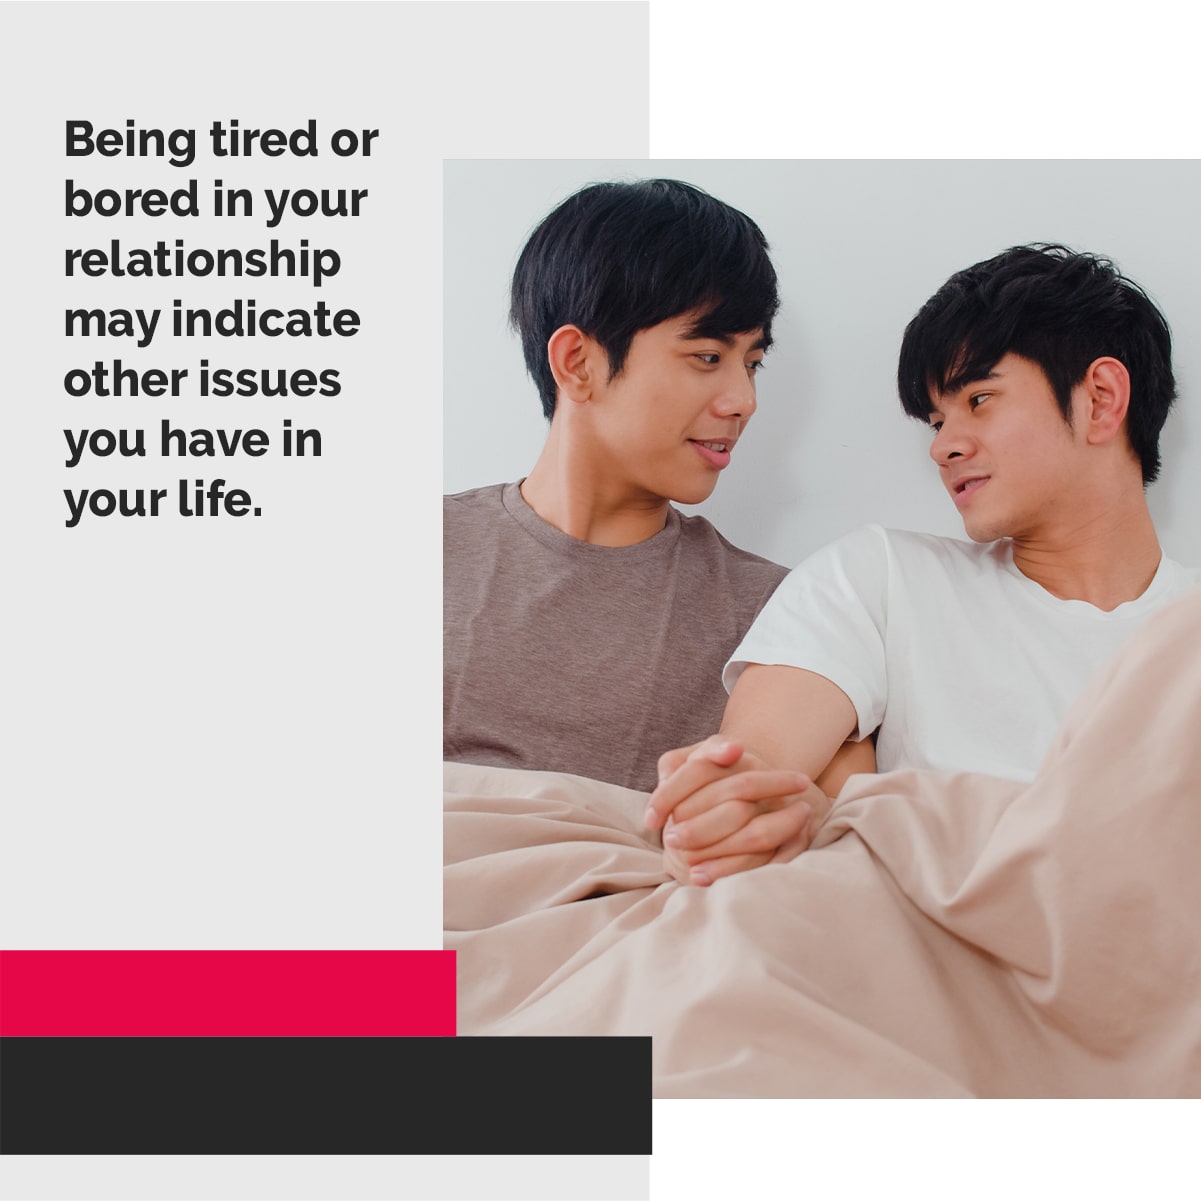 Being tired or bored in your relationship may indicate other issues you have in your life.